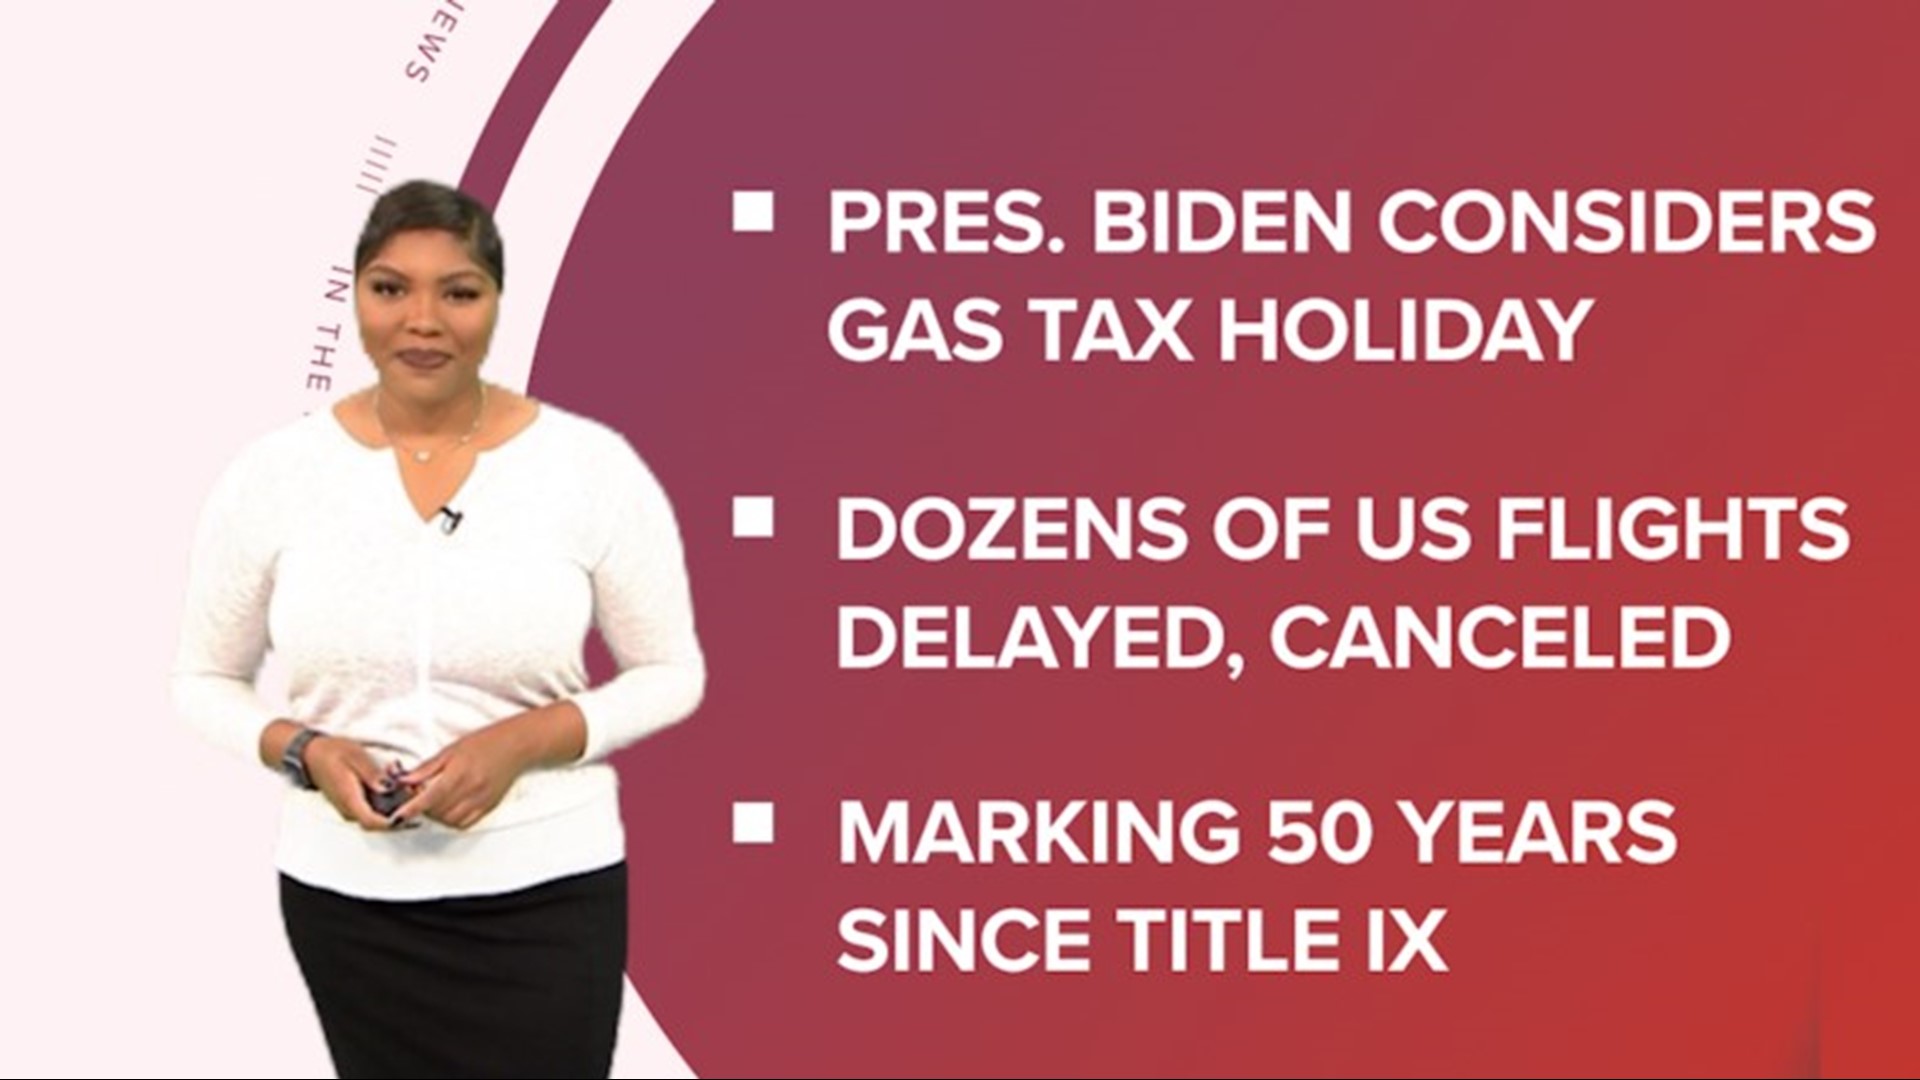 A look at what's happening across the U.S. from a federal gas tax pause, flight cancellations and marking 50 years since Title IX.